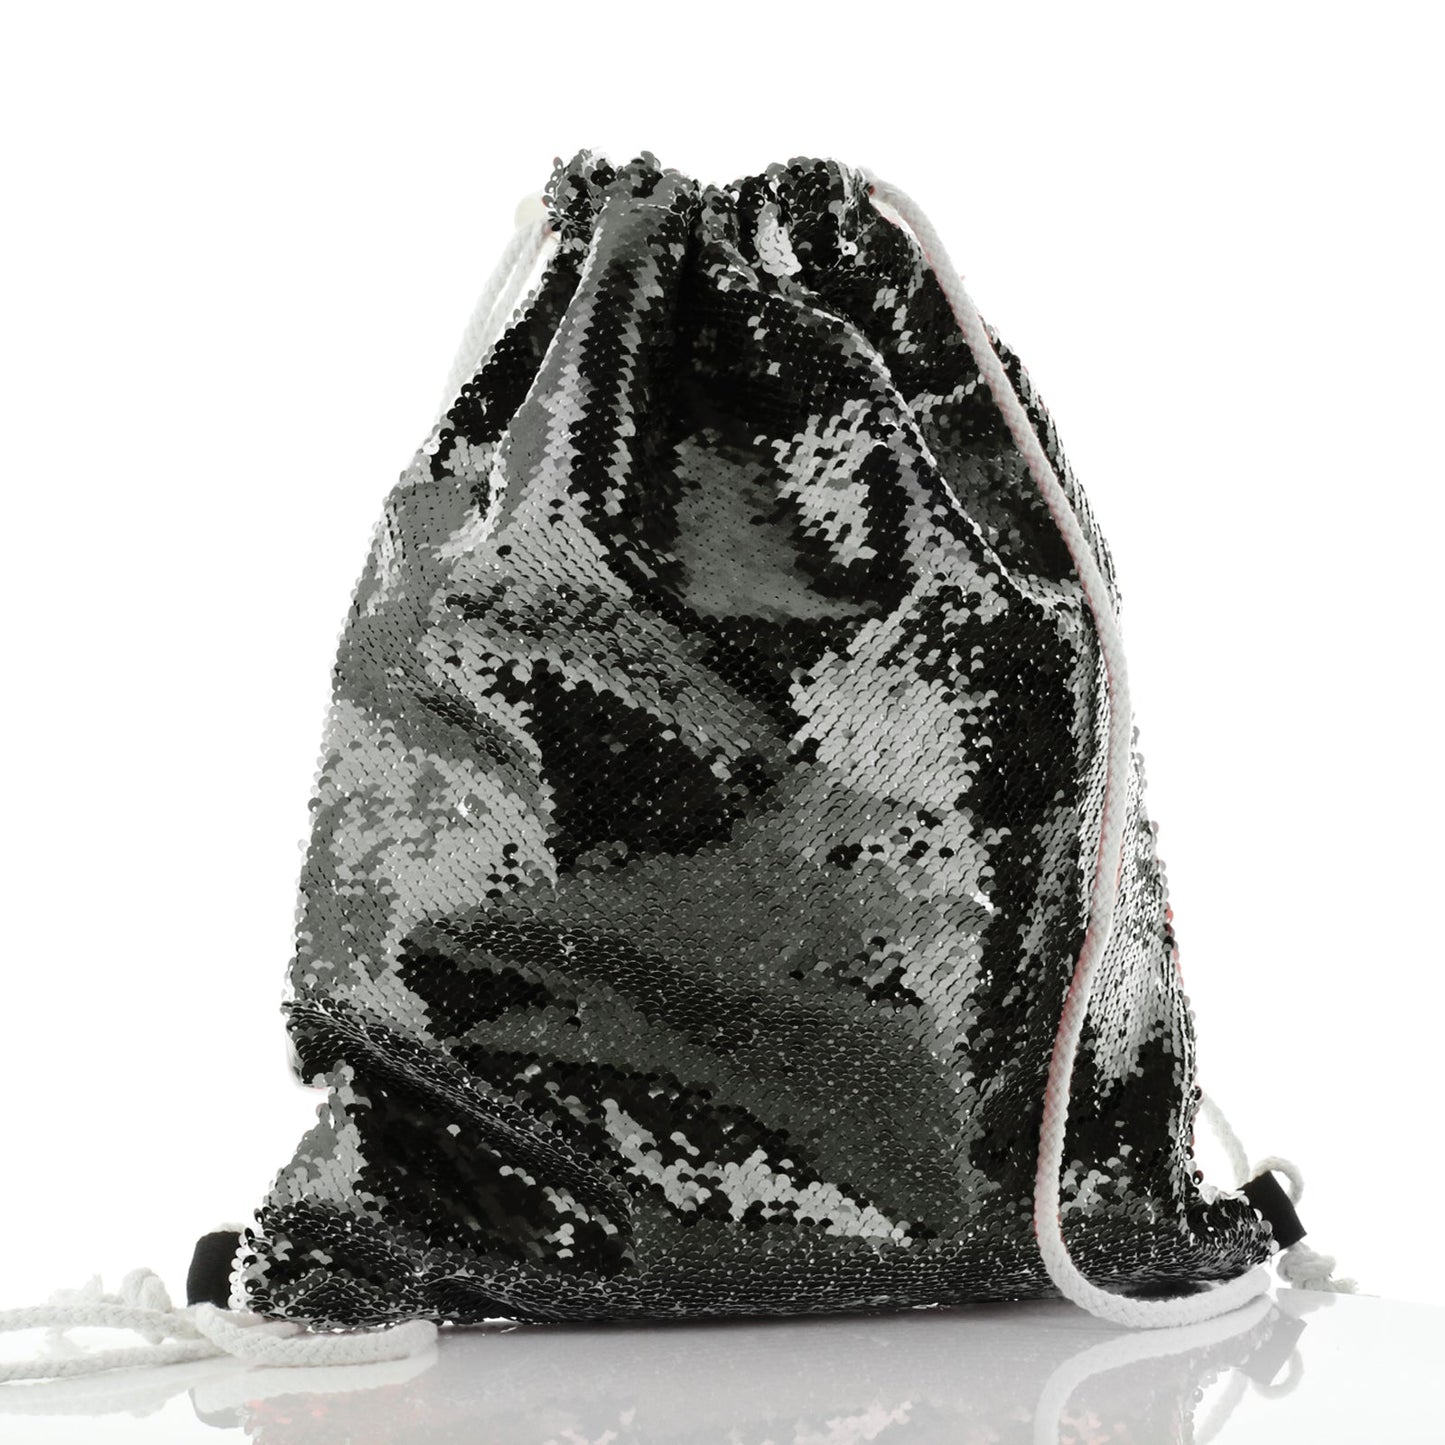 Personalised Sequin Drawstring Backpack with Badger Feather Hat and Cute Text